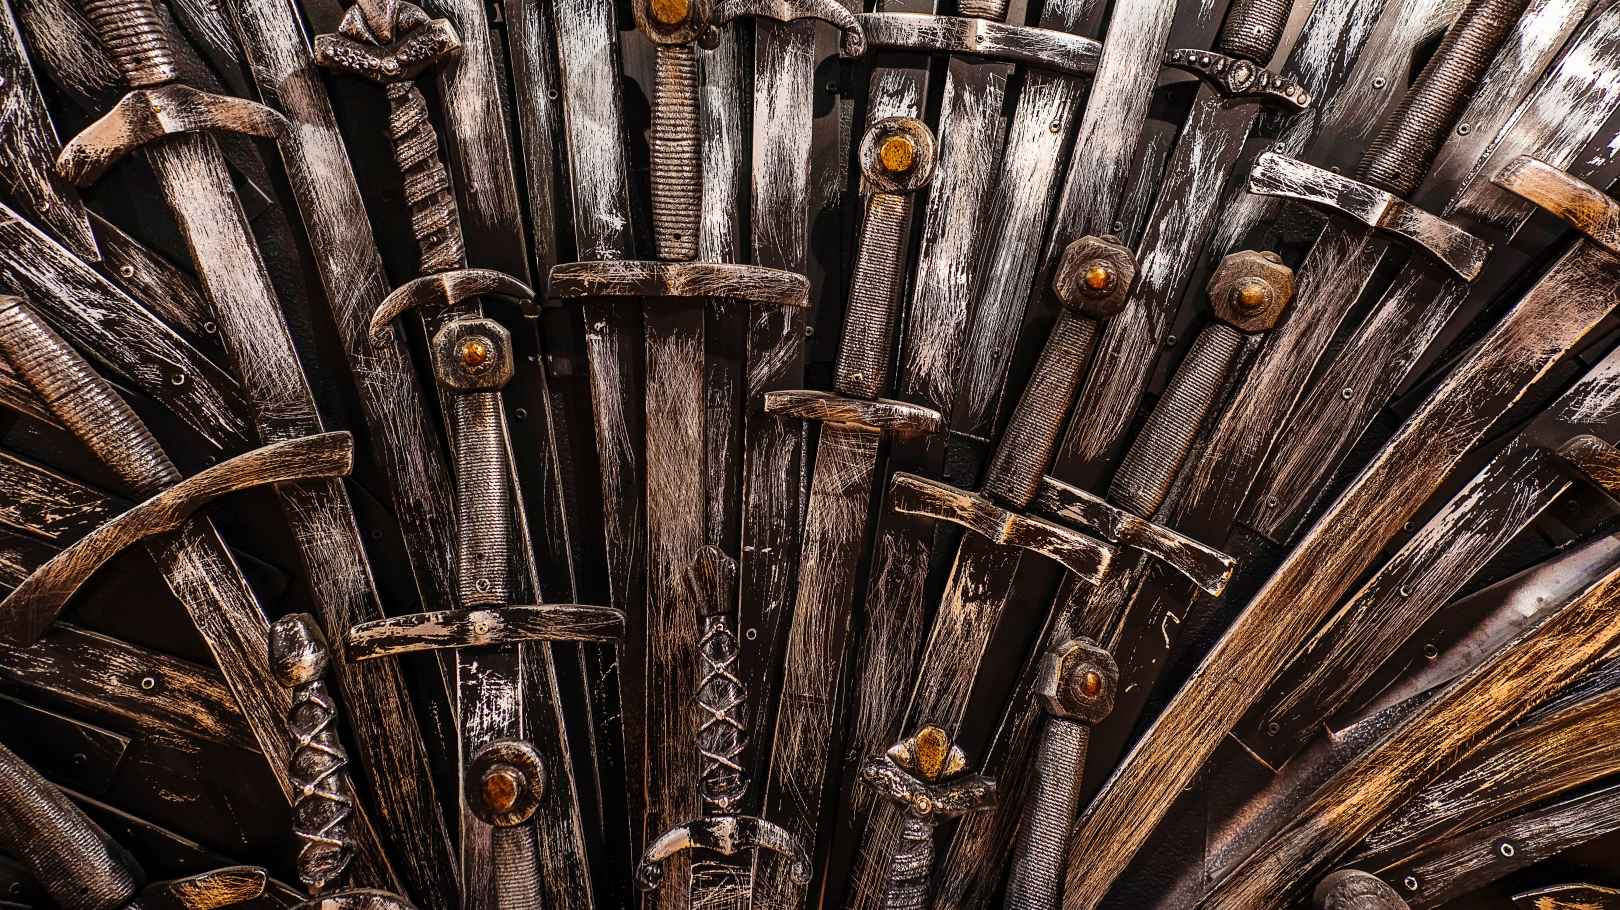 A list of our favourite characters from GoT and what kind of insurance products they might need